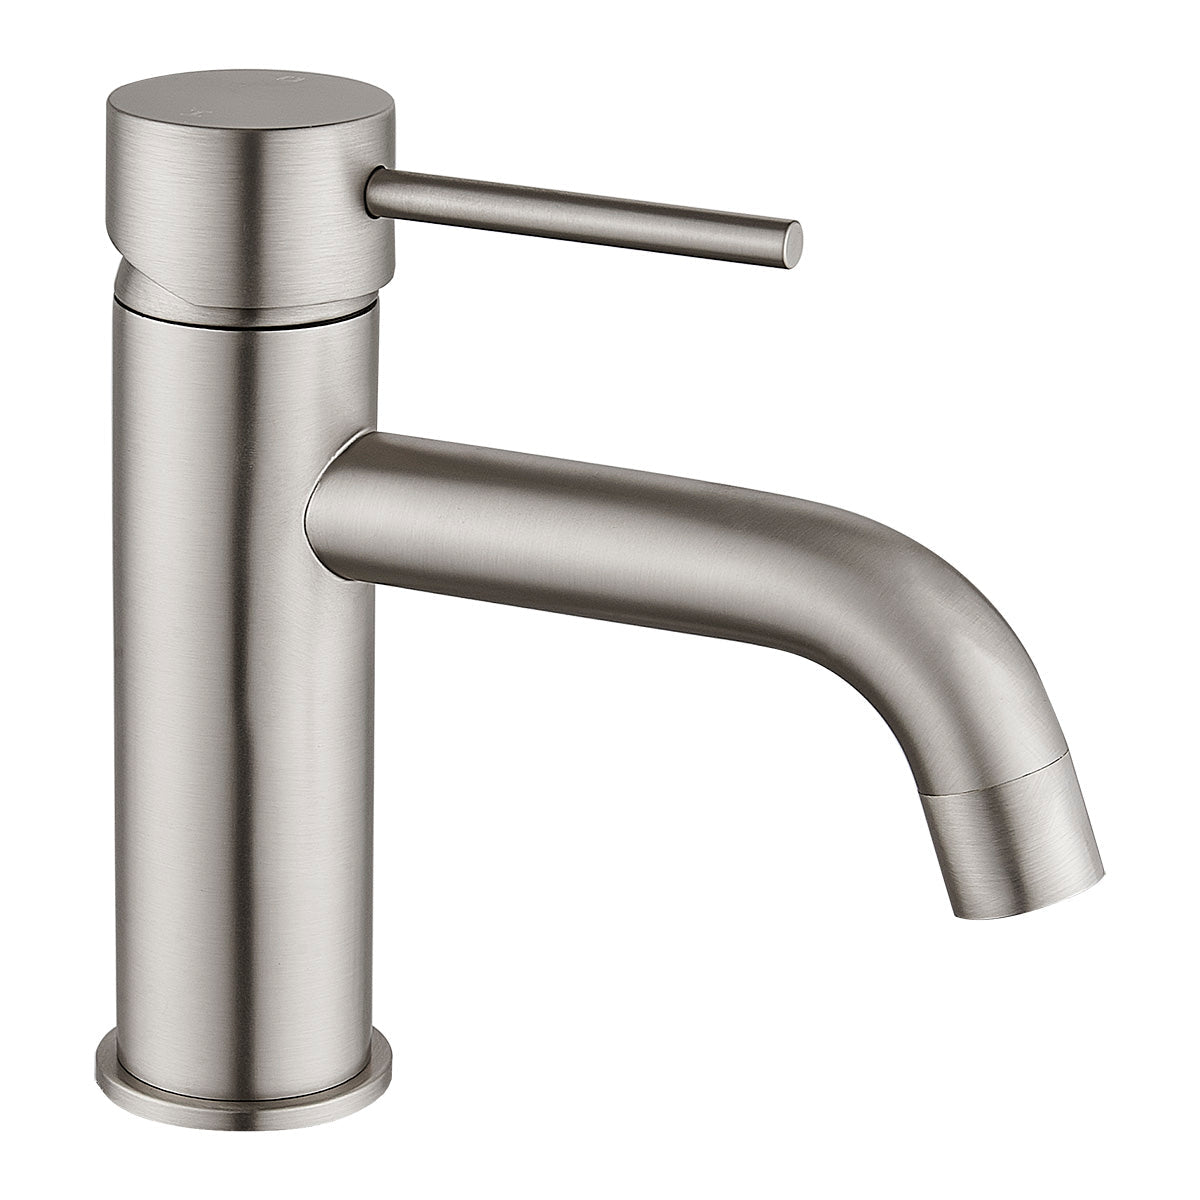 HELLYCAR IDEAL BASIN MIXER 164MM BRUSHED NICKEL